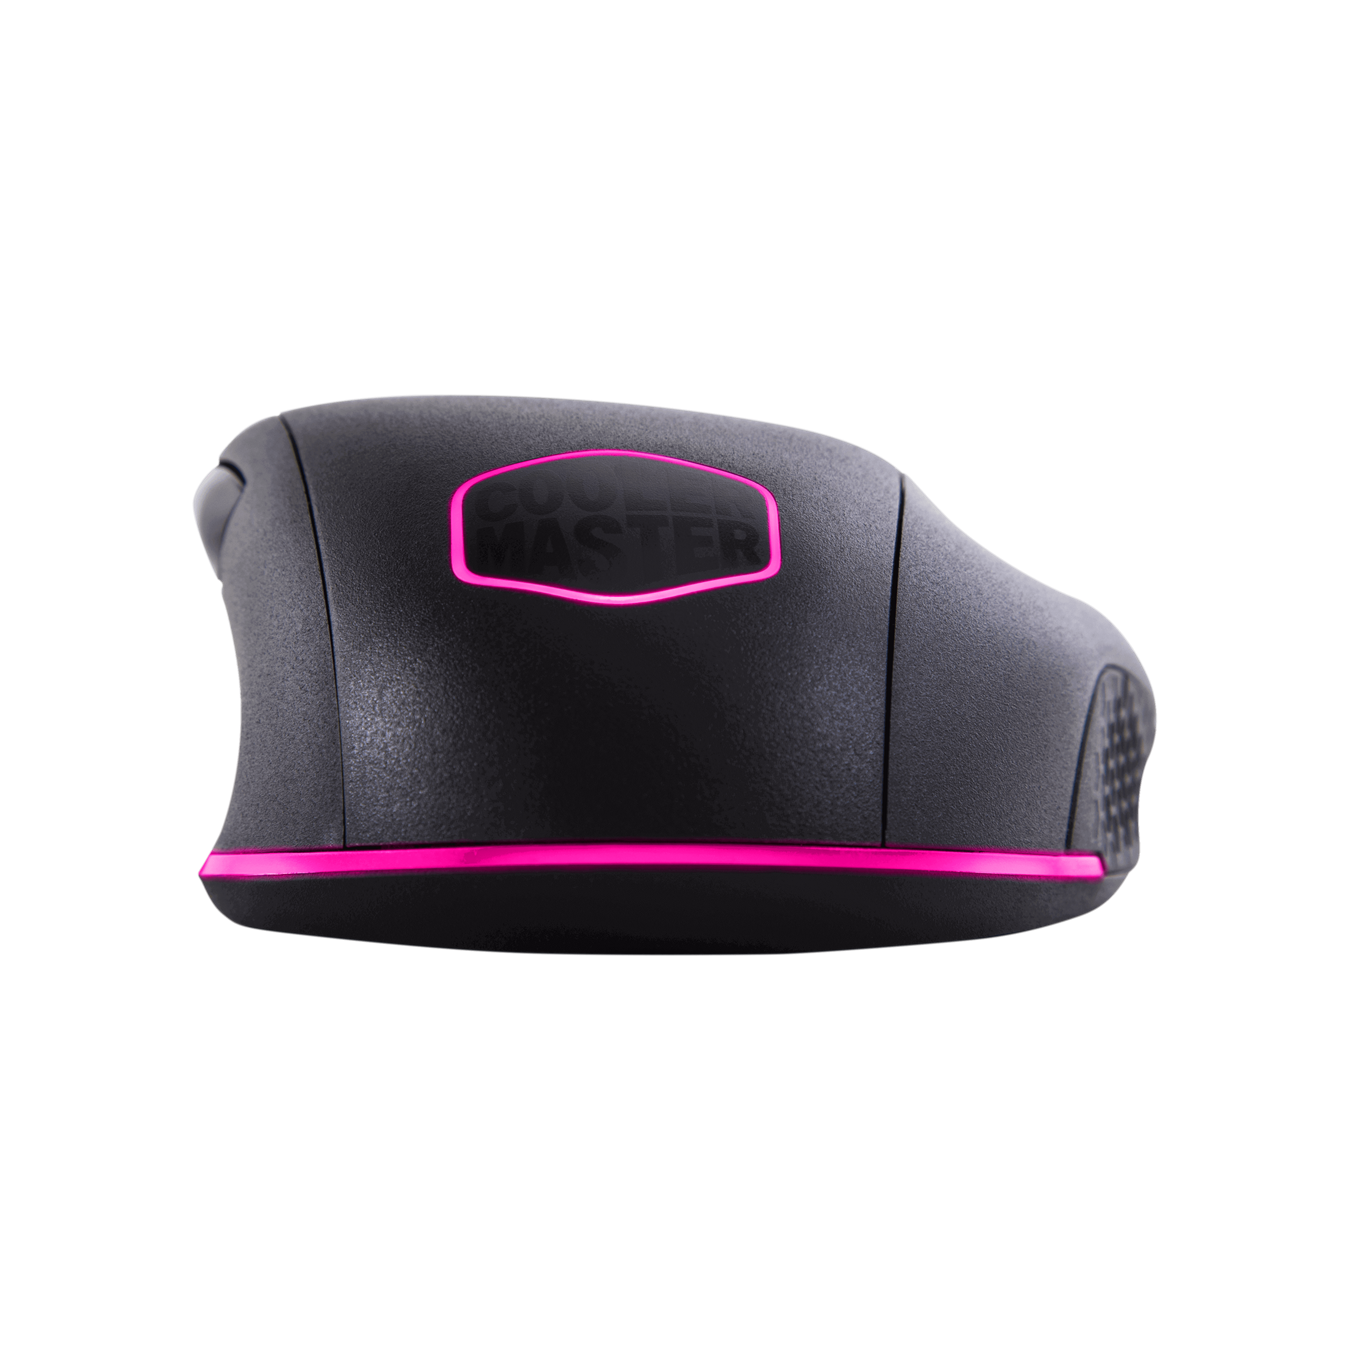 MasterMouse MM520 Gaming Mouse - Brilliant RGB Illumination in Three Zones to customize the look and match your Gaming System and other peripherals. 